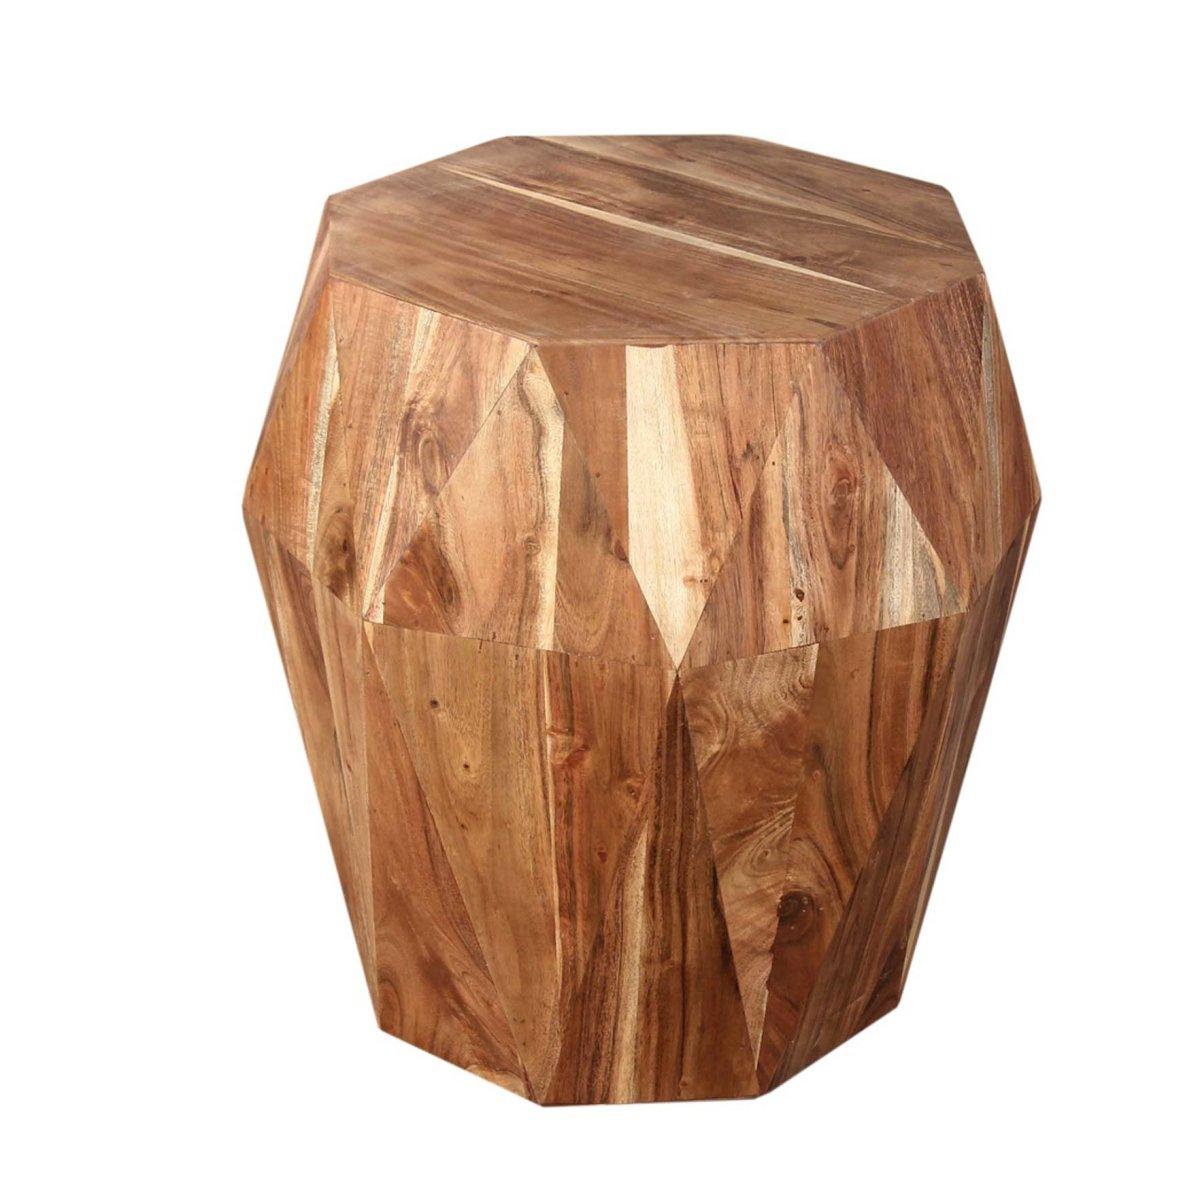 Acacia wood Diamond End Table - Rustic Furniture Outlet